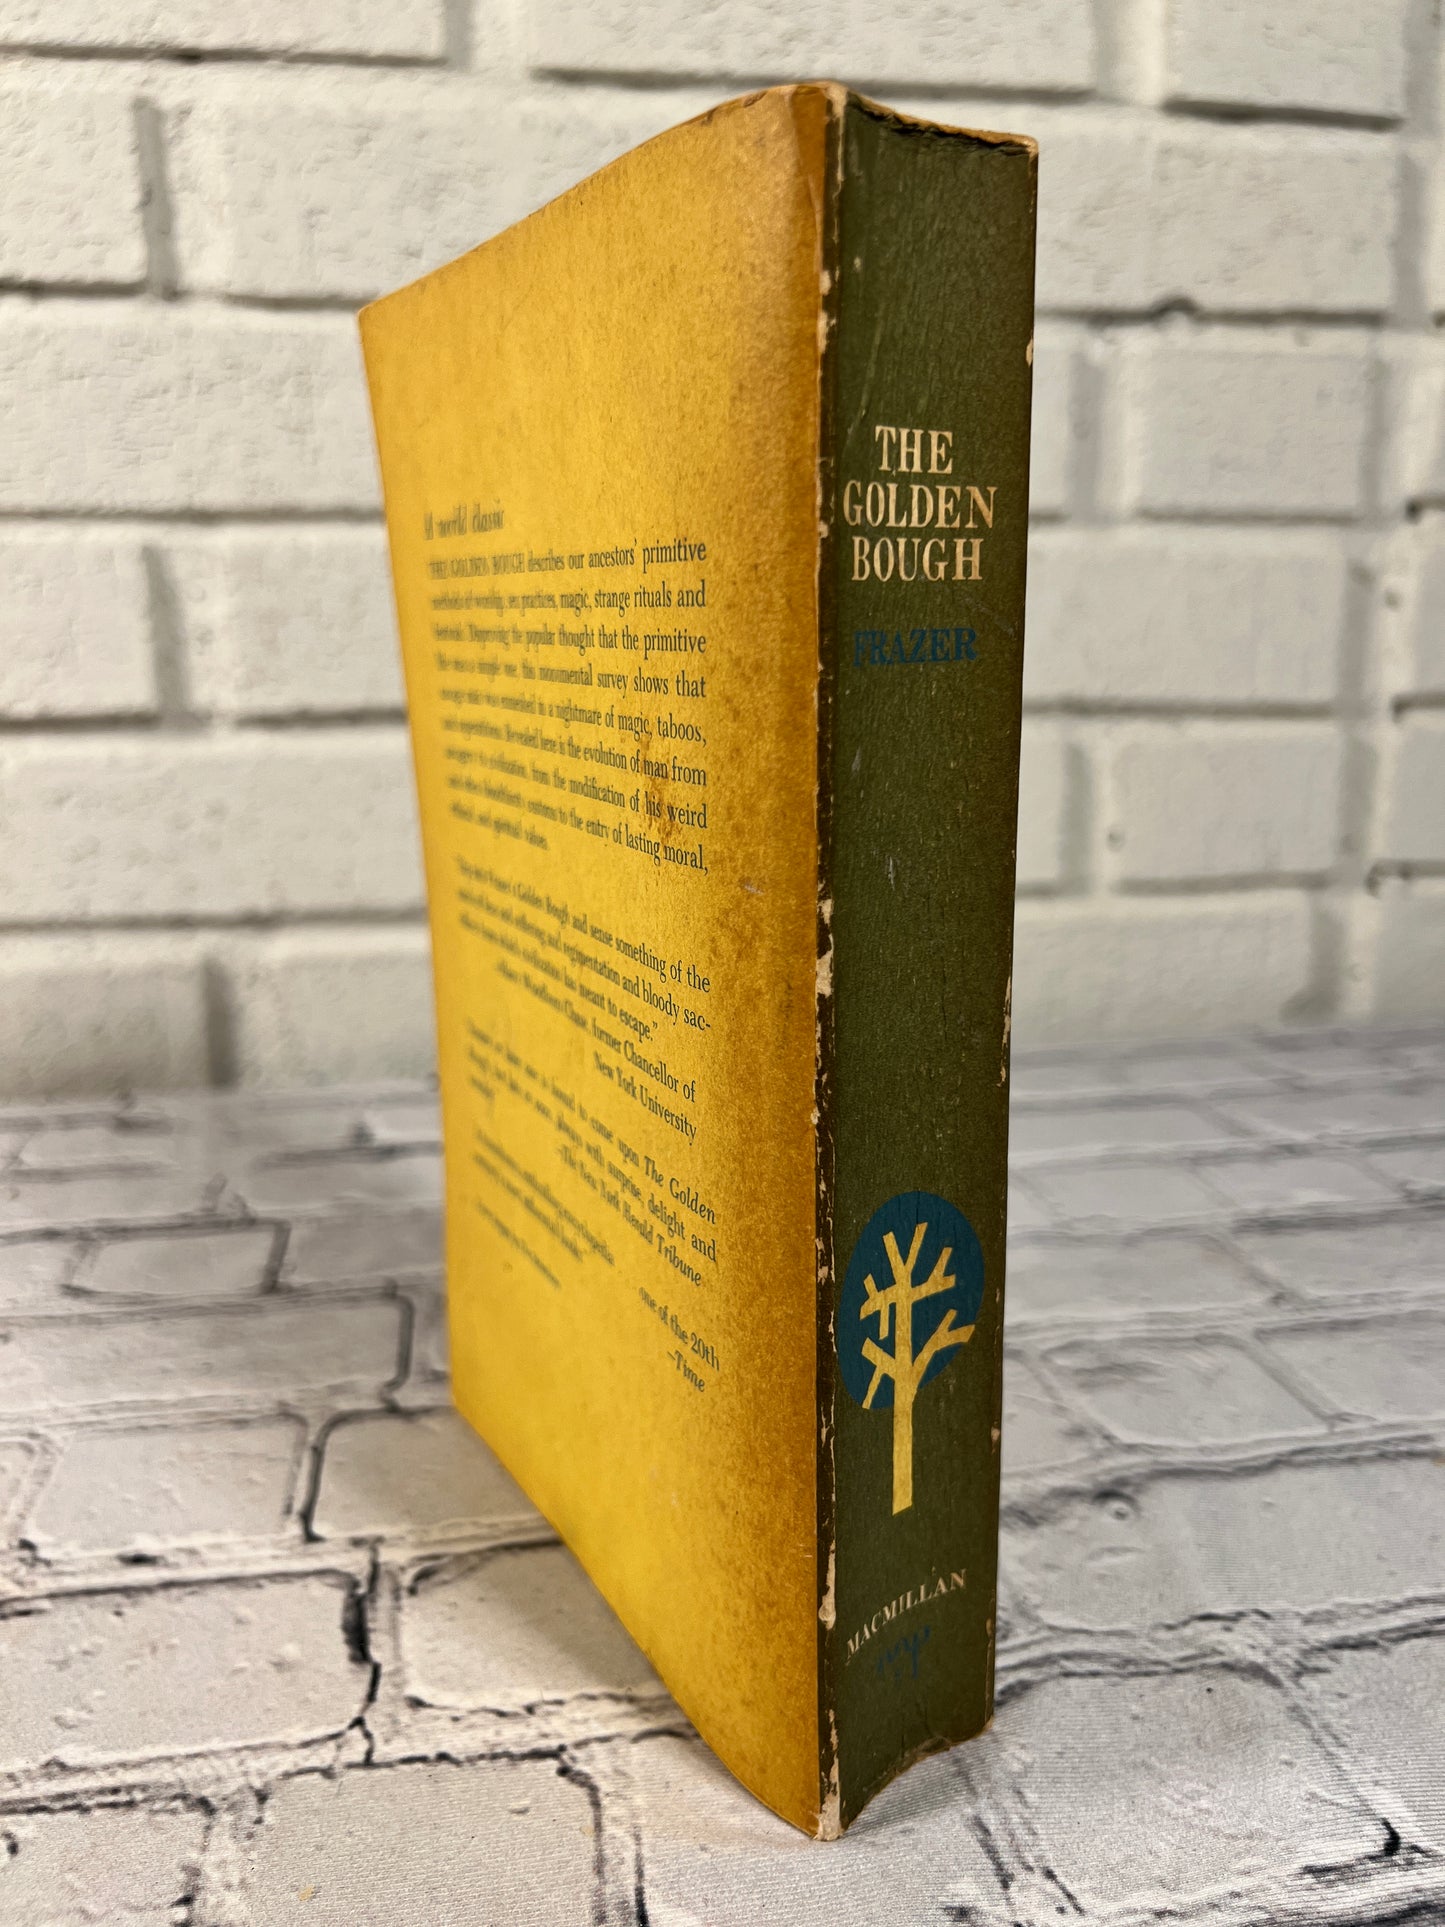 The Golden Bough by Sir James George Frazer [1963]